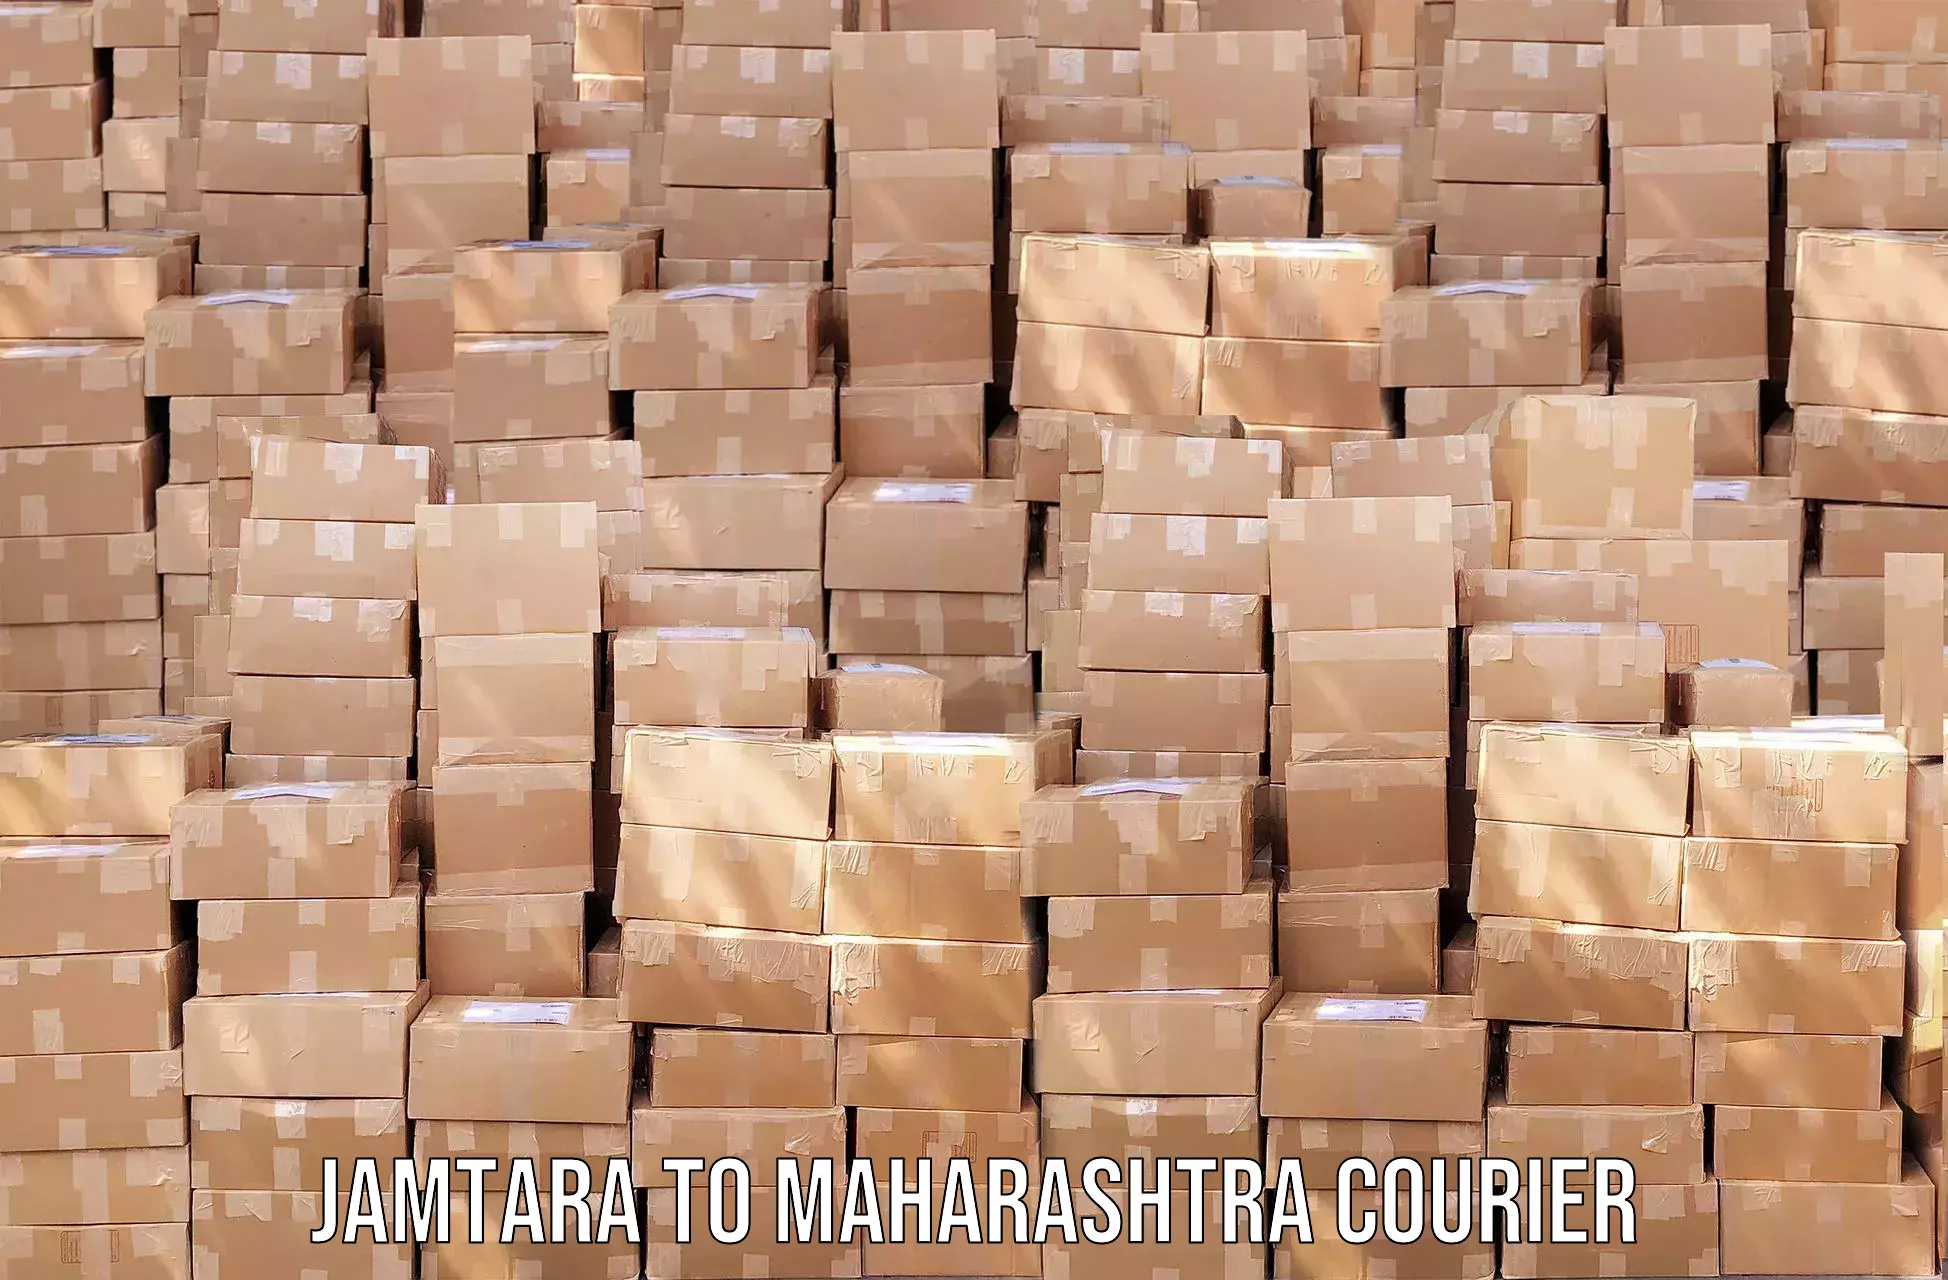 Package delivery network Jamtara to Pimpri Chinchwad